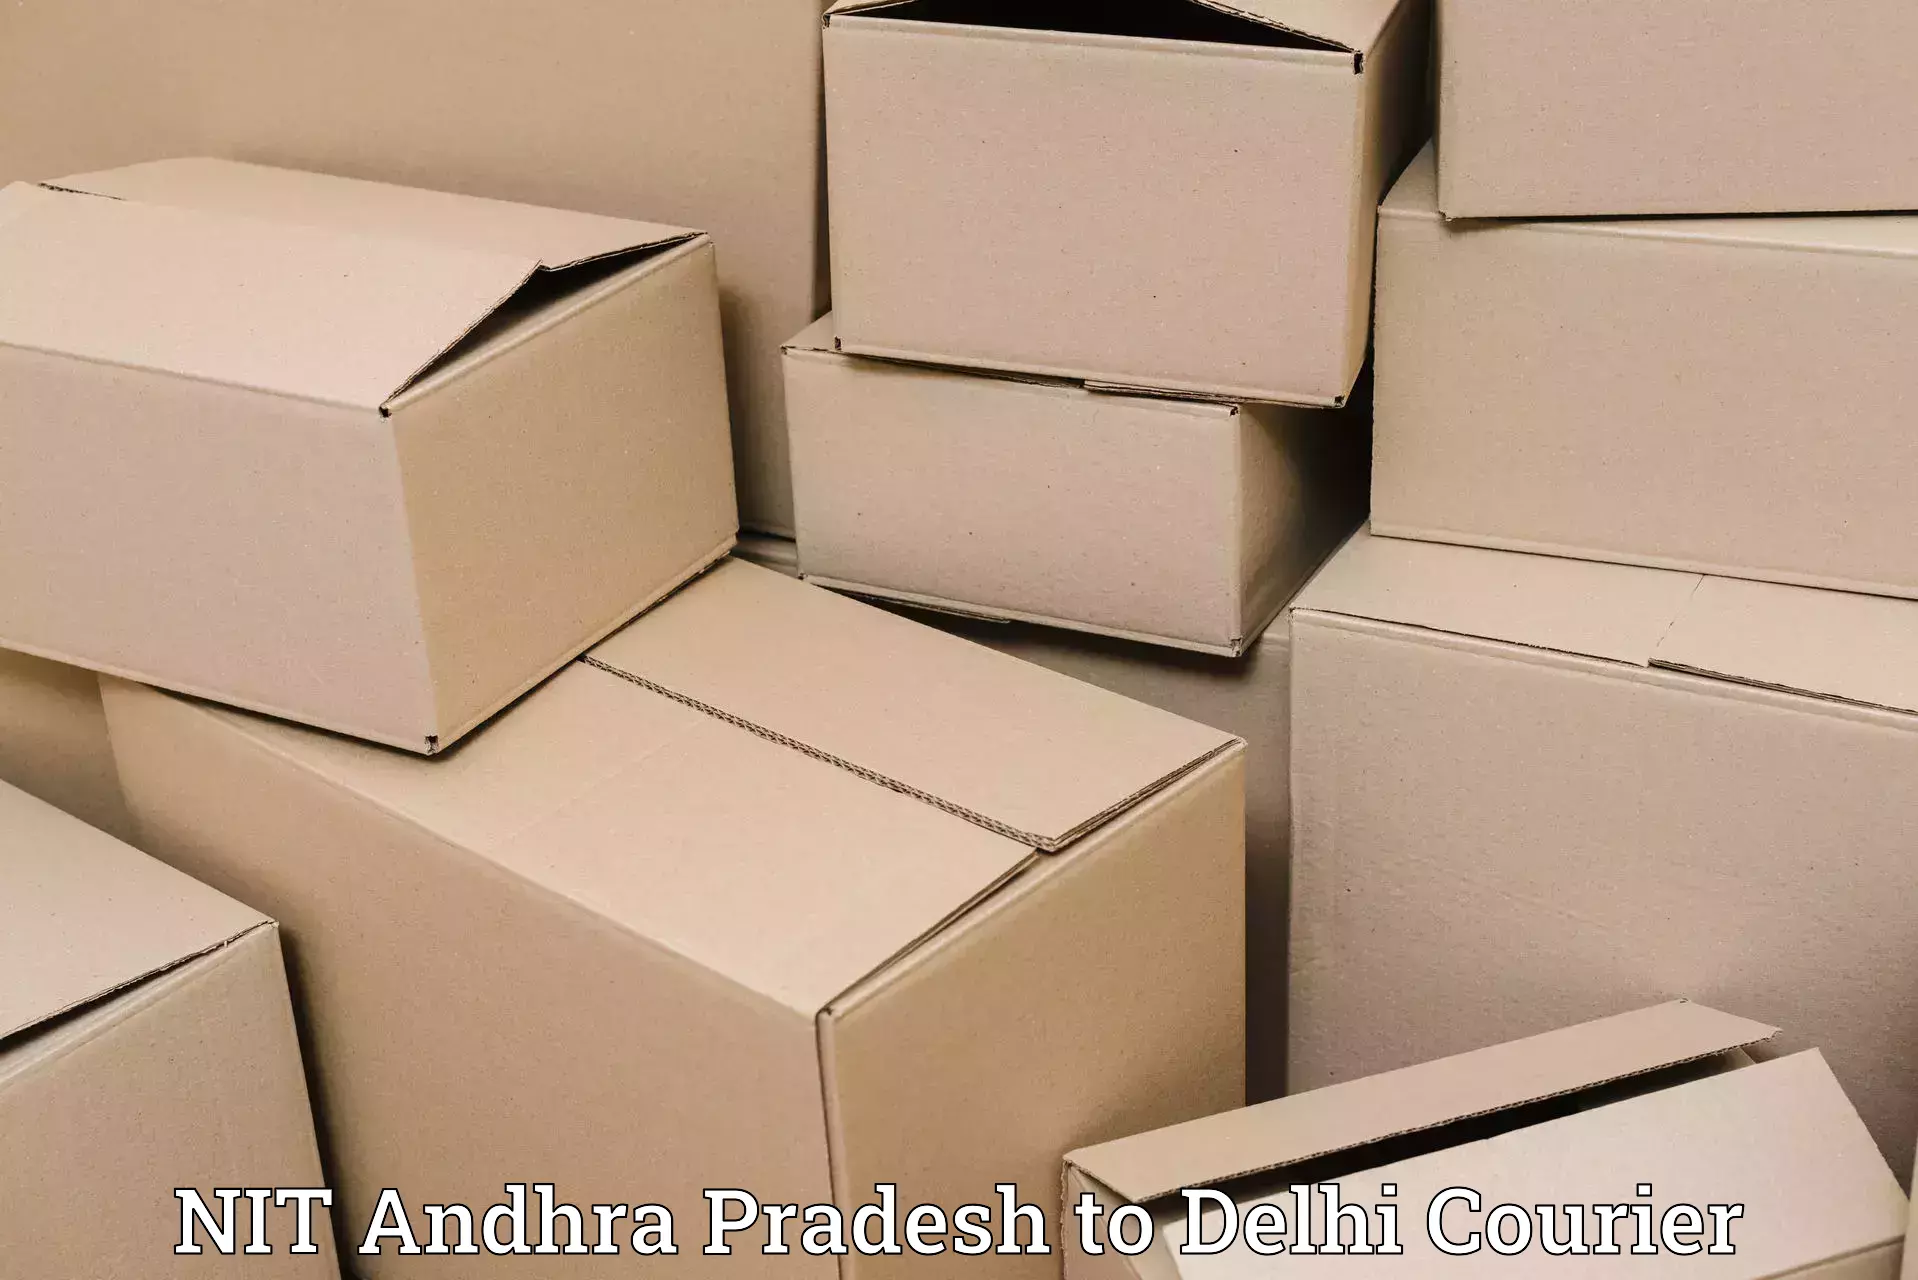 24-hour courier services in NIT Andhra Pradesh to NIT Delhi